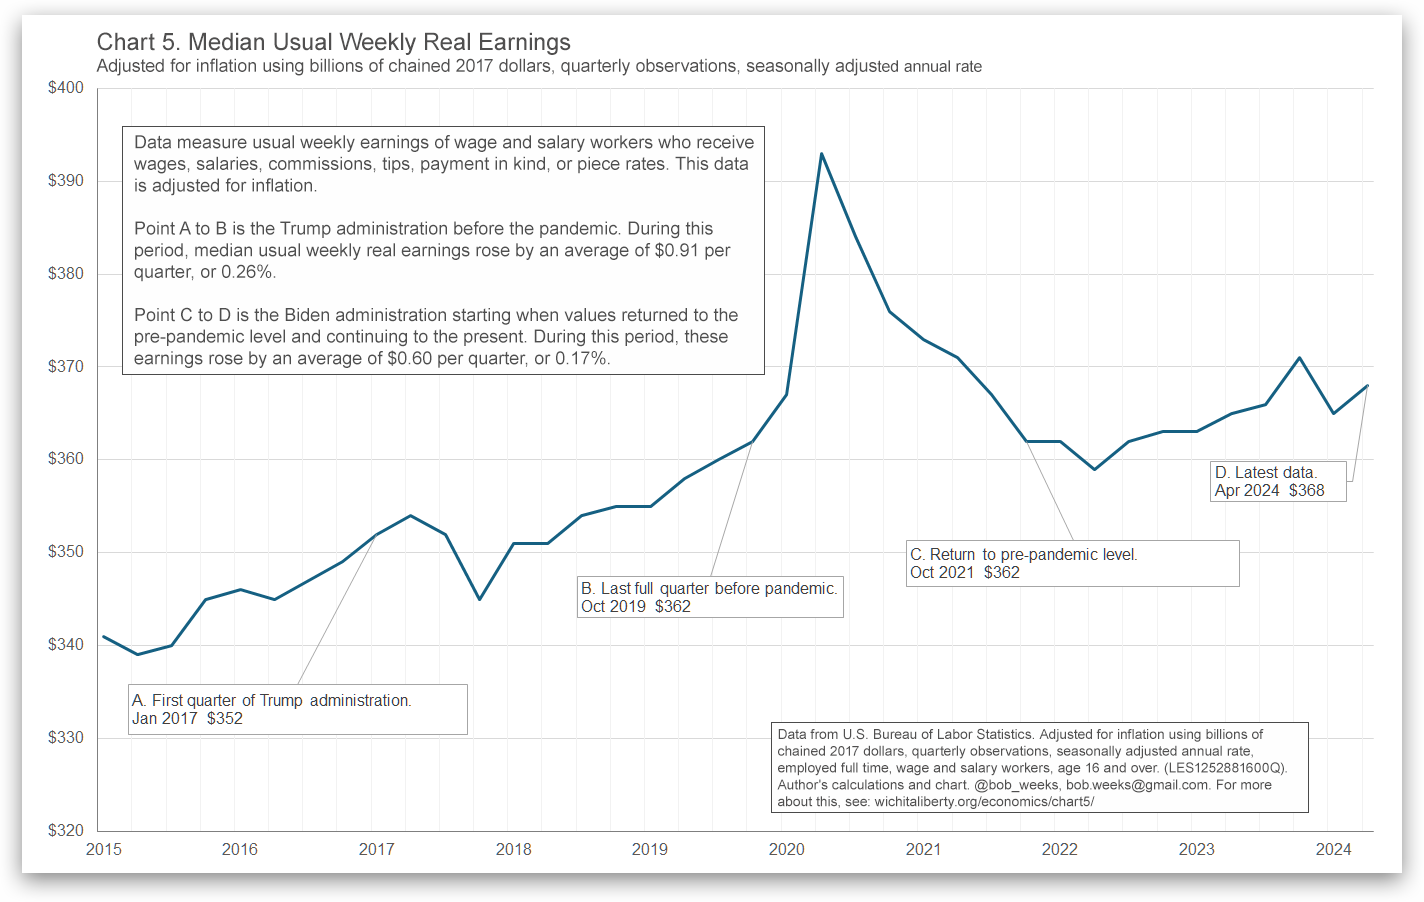 Median Usual Weekly Real Earnings, pre- and post-Covid